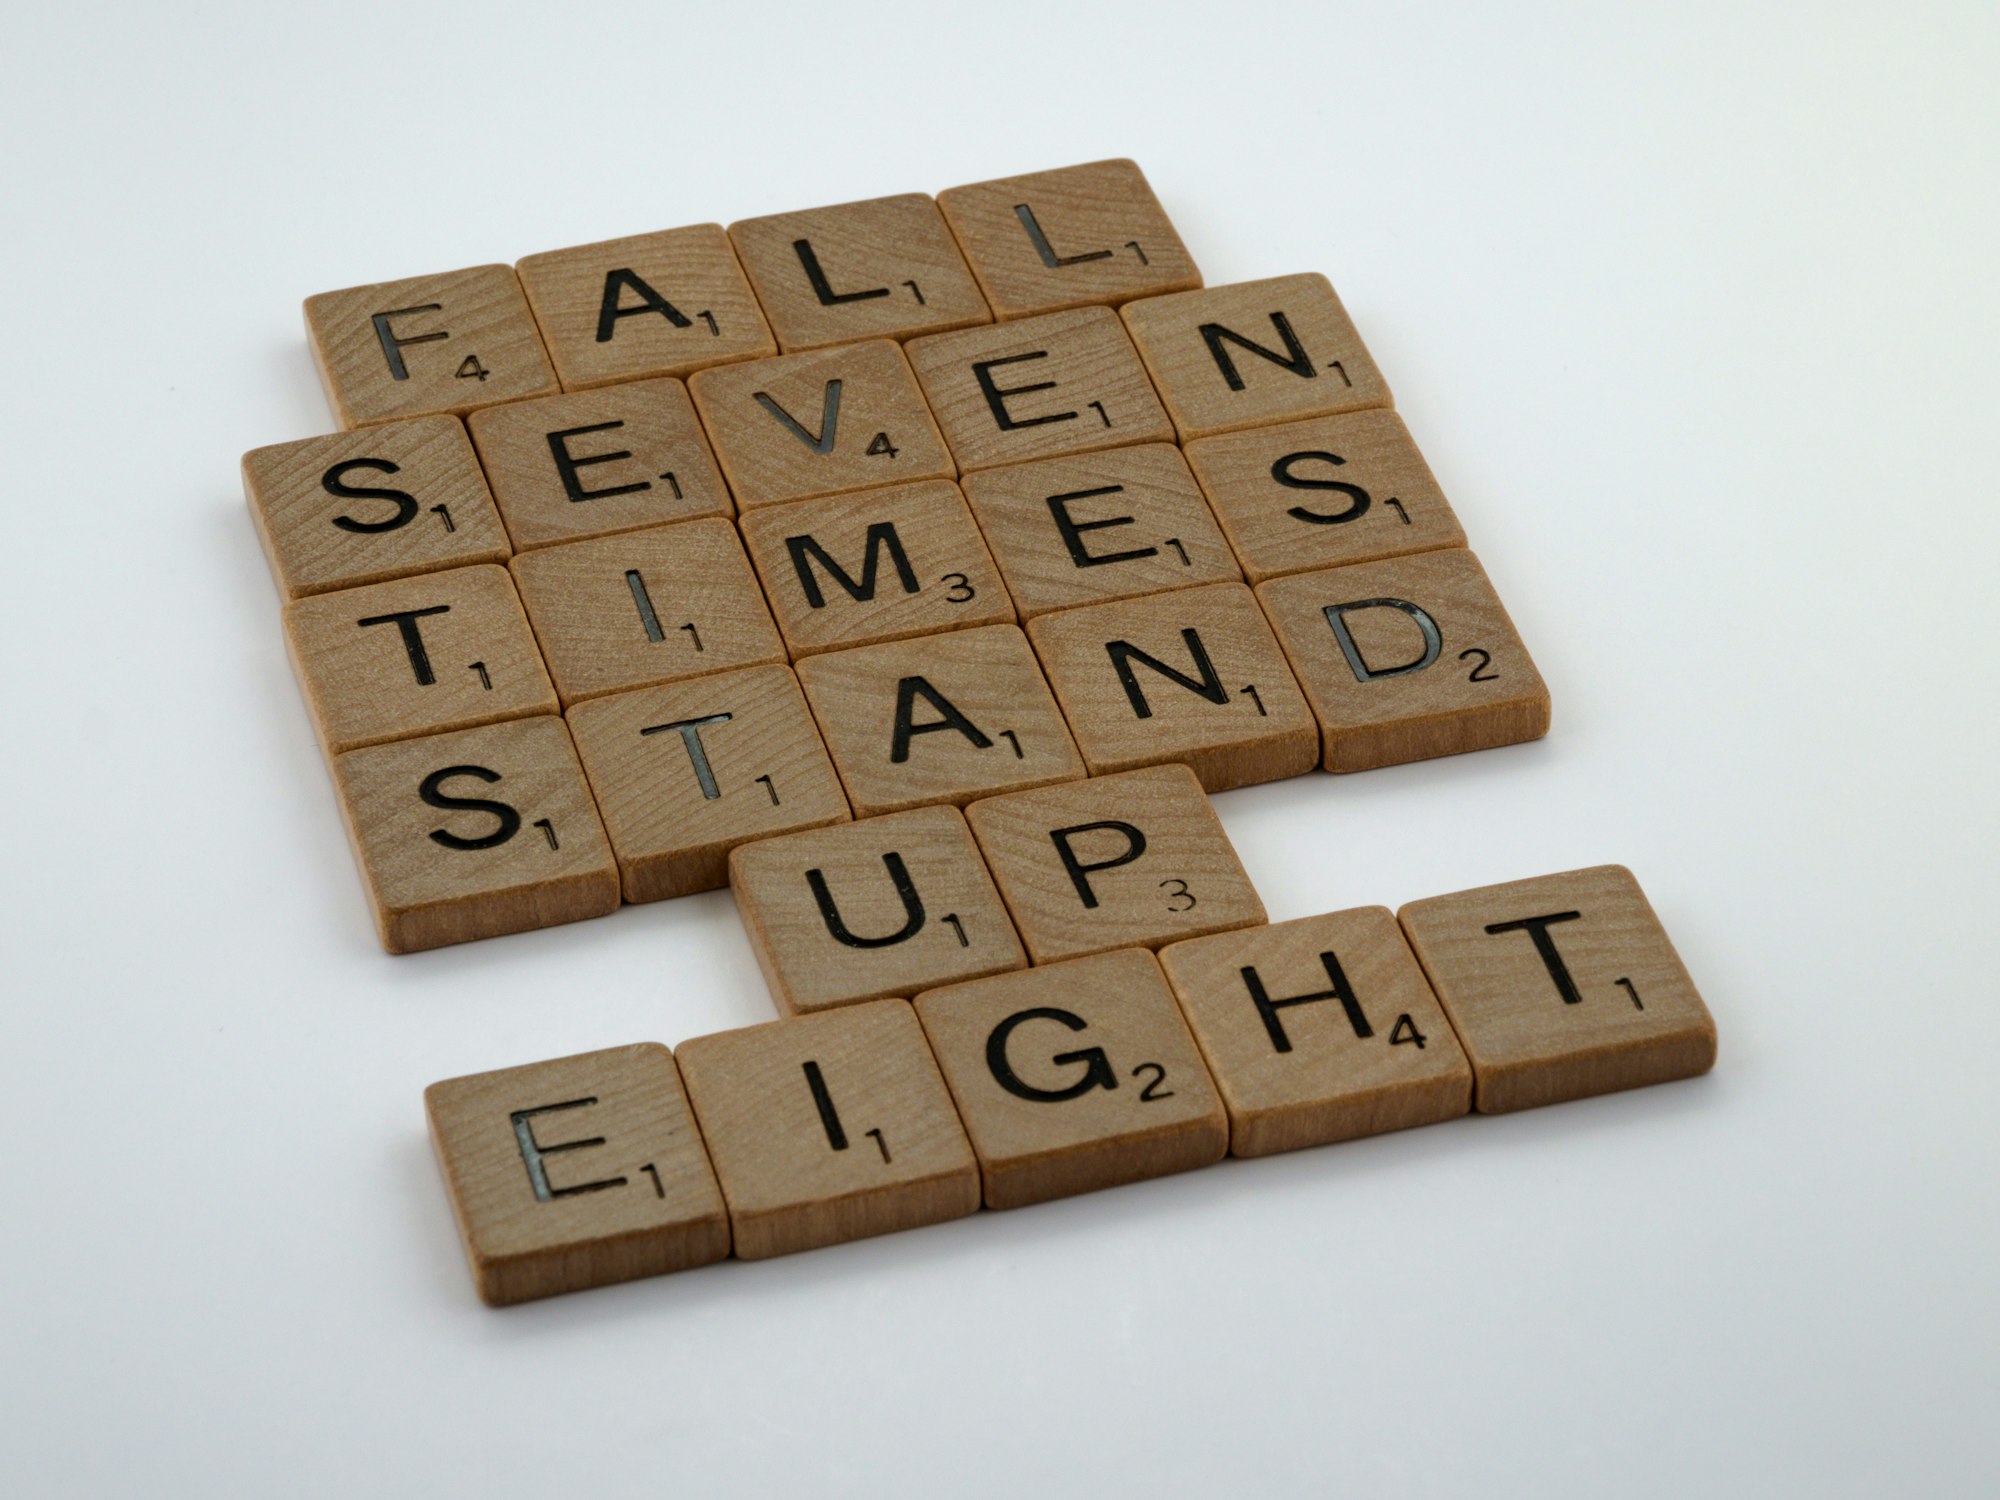 scrabble, scrabble pieces, lettering, letters, wood, scrabble tiles, white background, words, quote, perseverance, resilience, fortitude, keep going, fall seven times stand up eight, wisdom, never give up, never surrender, 